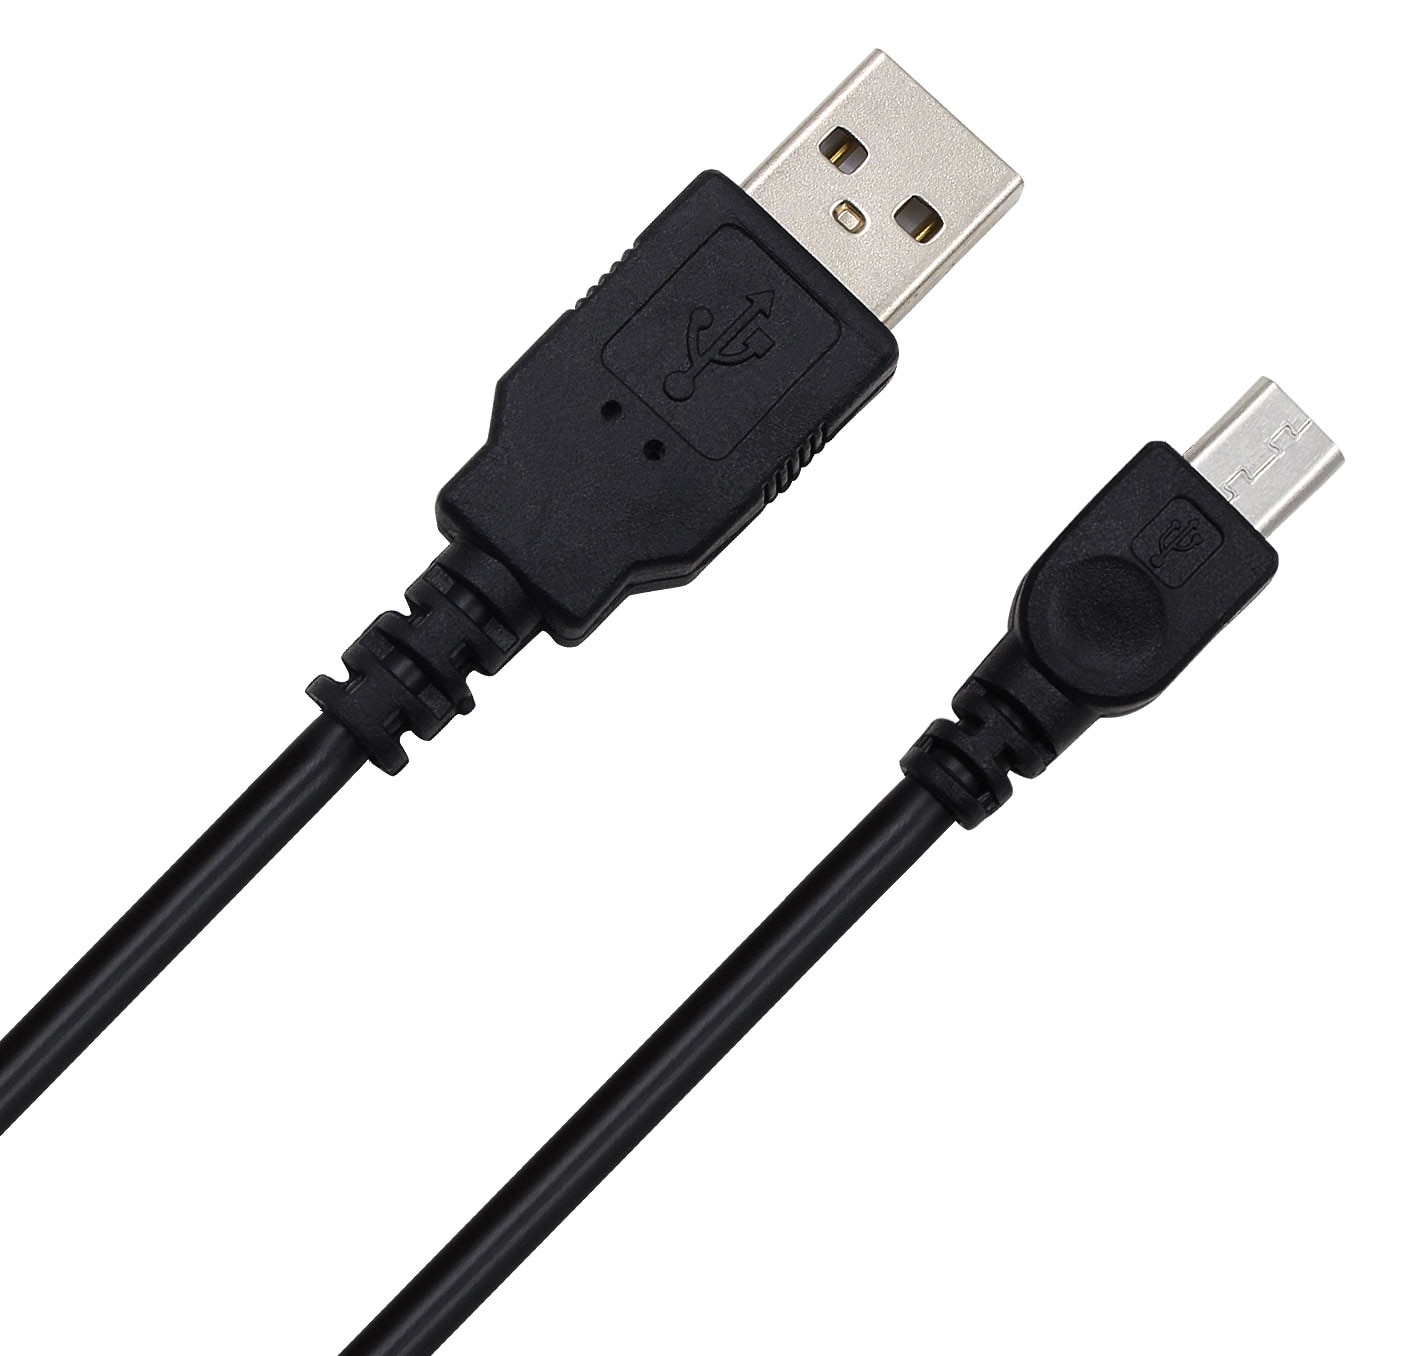 USB Data Sync Oplader Kabel Cord voor Dell Venue 11 Pro 7000 Serie VOOR DELL VENUE 8 PRO TABLET